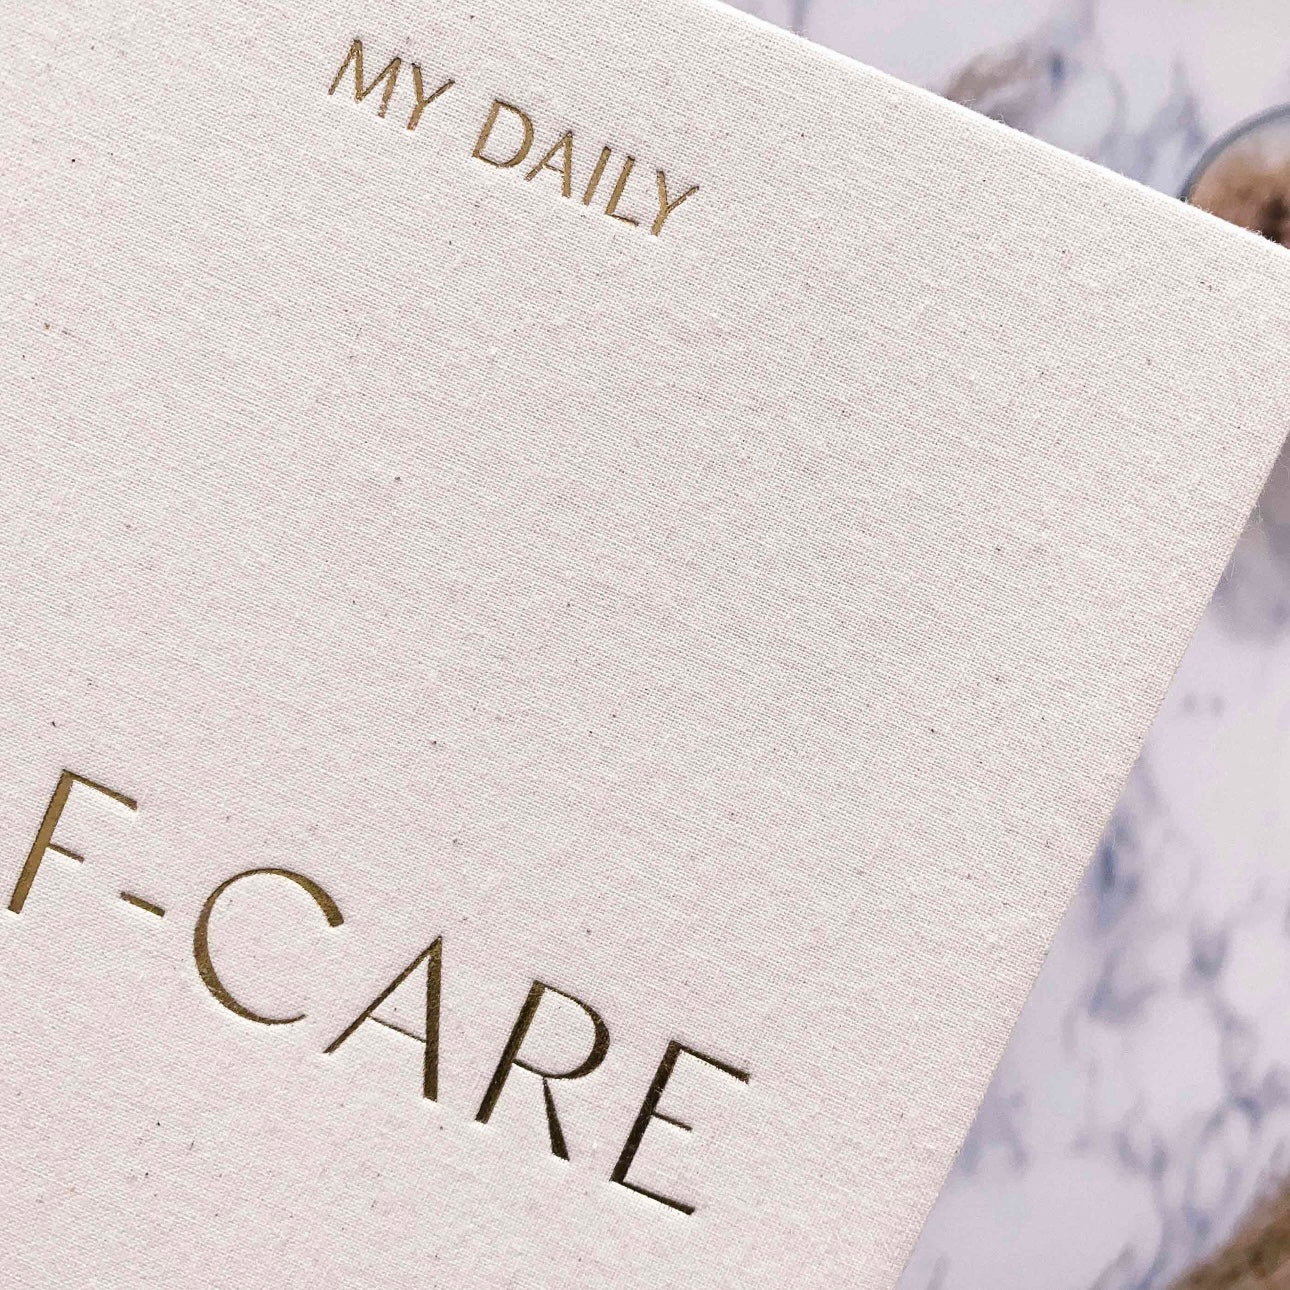 My Daily Self Care Journal - Almond